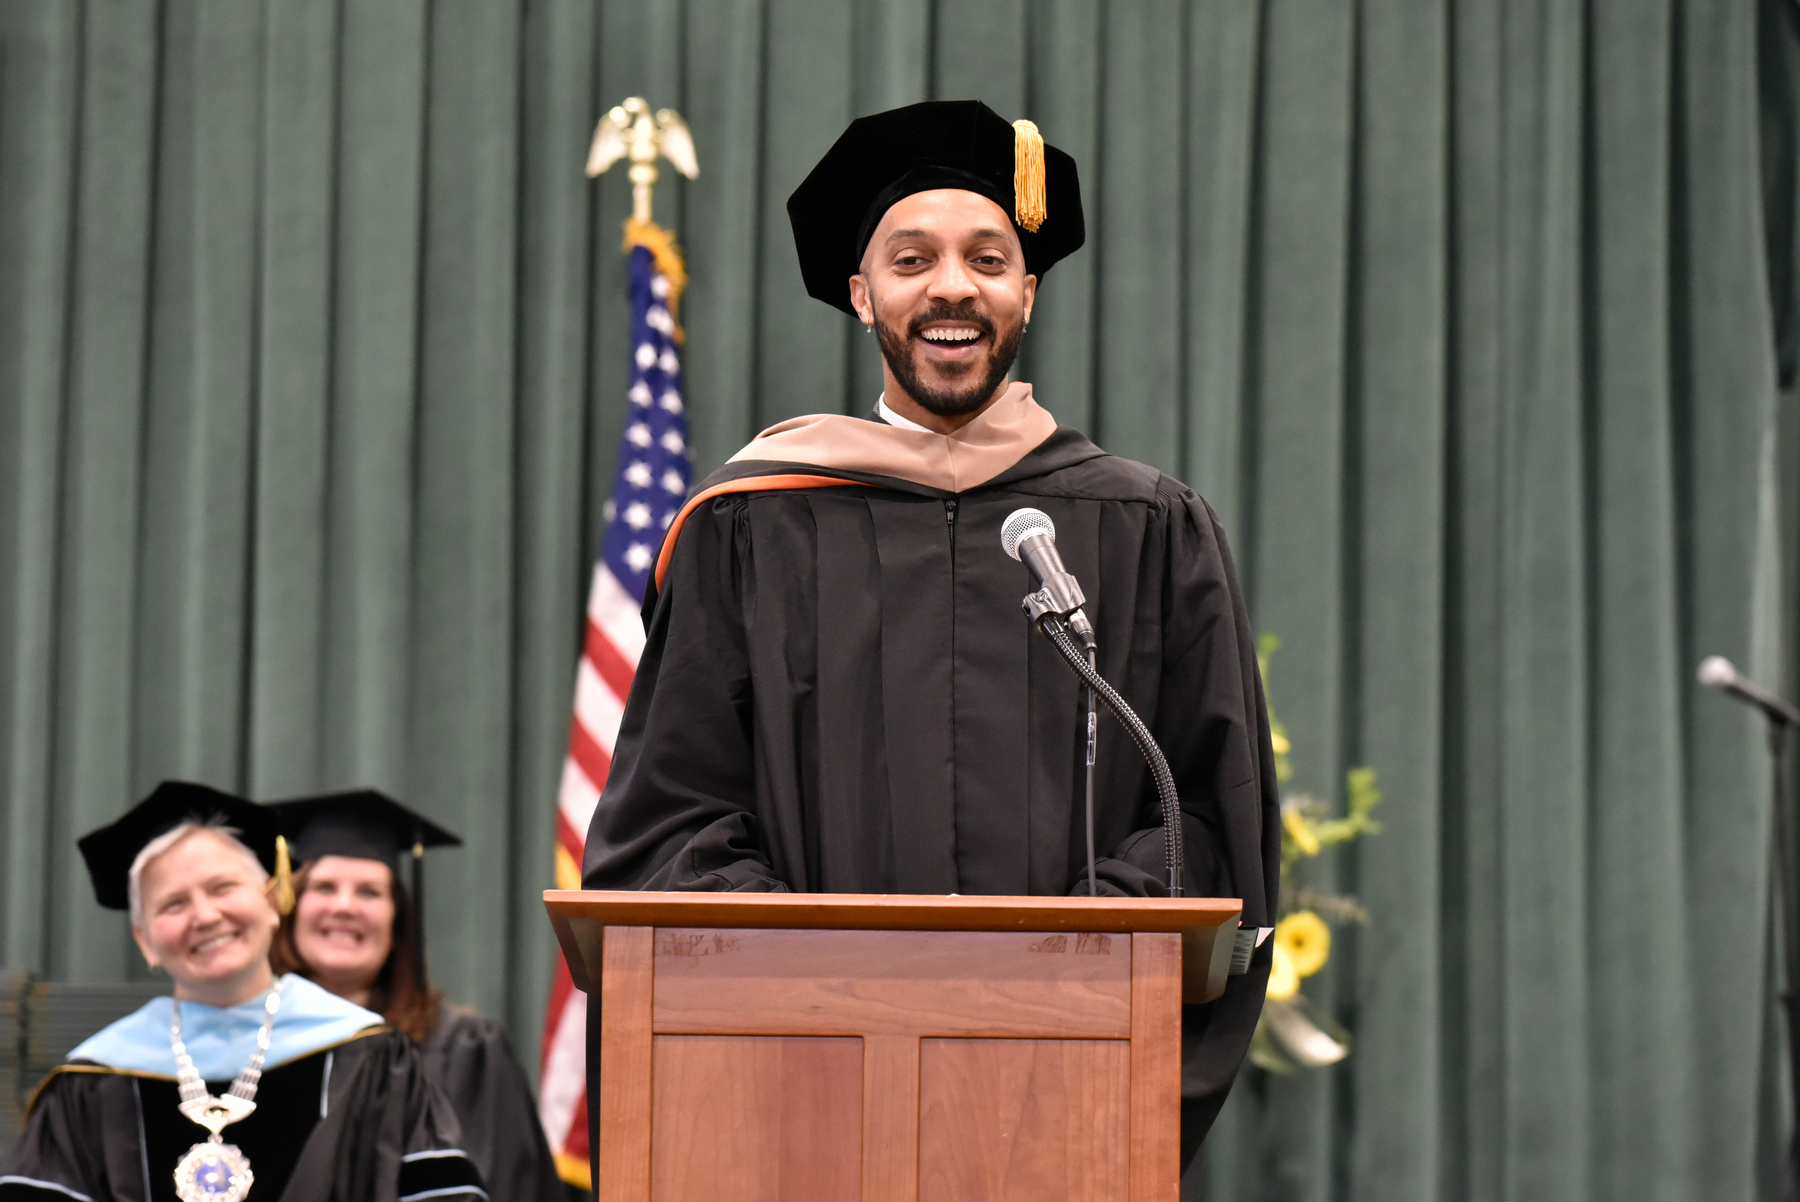 Alumnus Cameron Jones served as Commencement speaker for SUNY Oswego's December Commencement Dec. 10 in the Deborah F. Stanley Arena and Convocation Hall. Jones, a 2009 SUNY Oswego broadcasting and mass communication graduate, is manager of development for integrated content strategy for ABC News Studios.